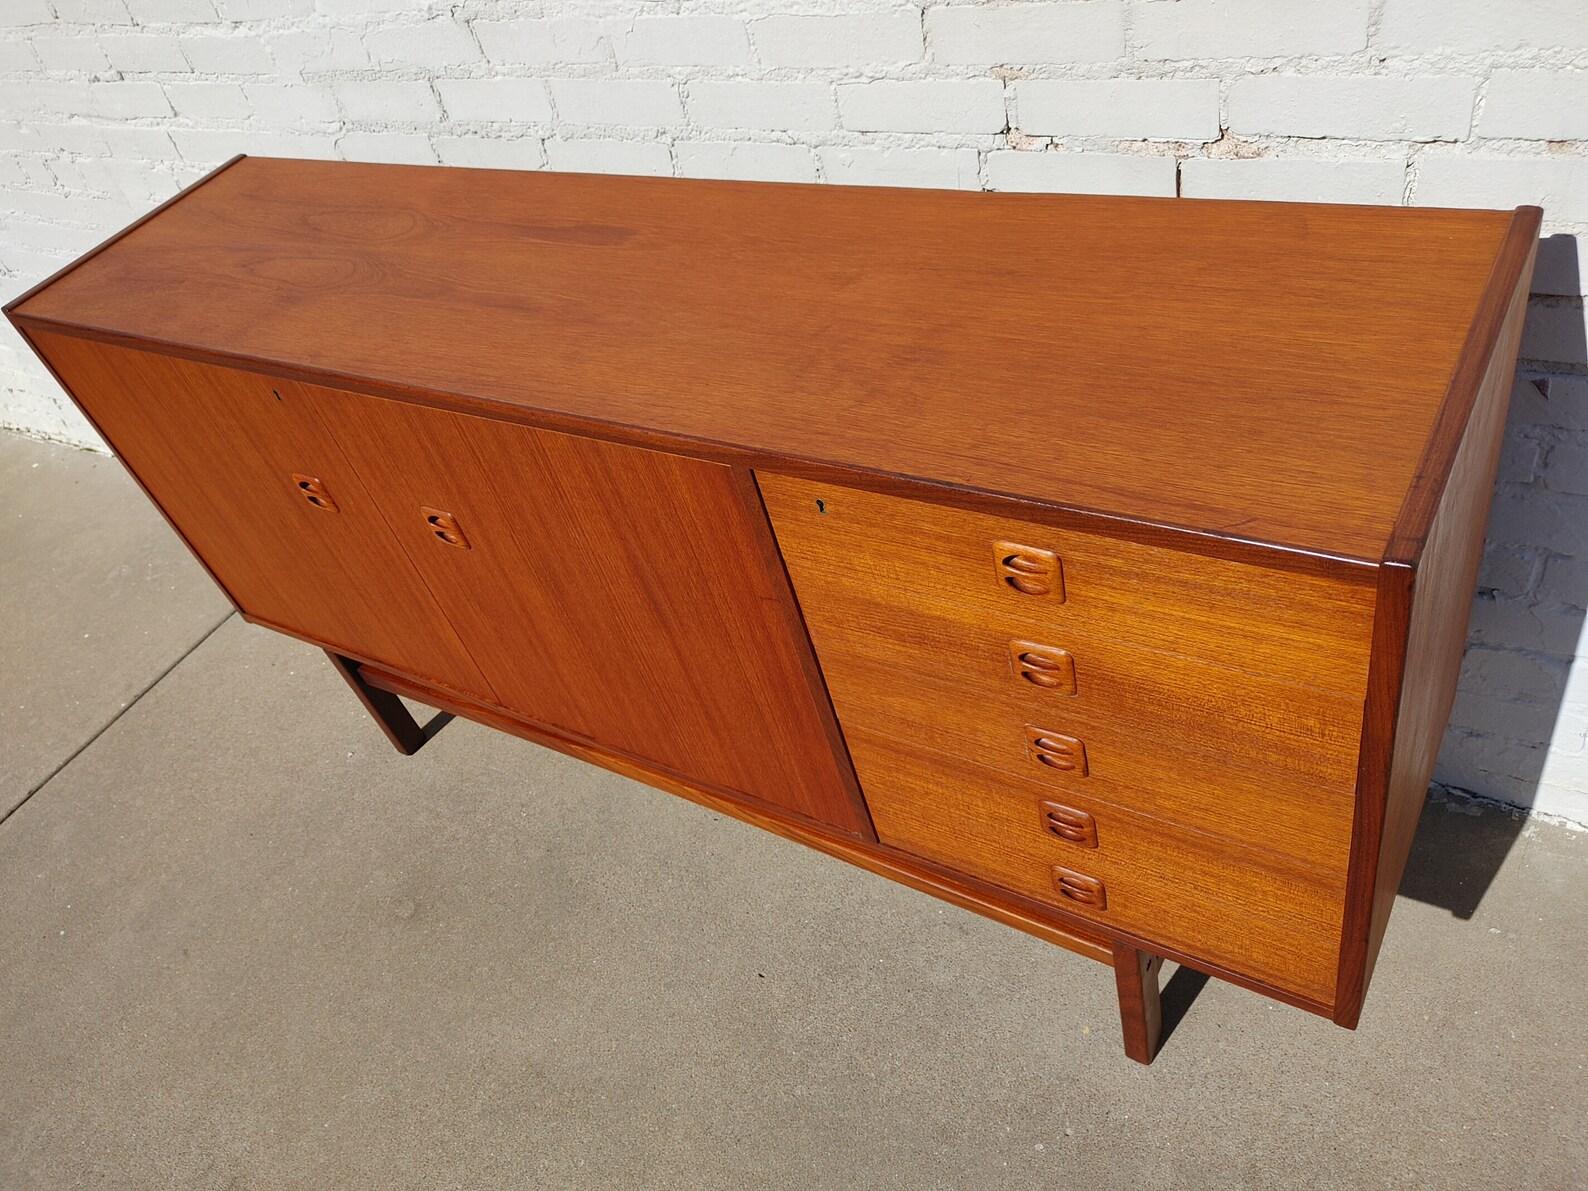 Mid Century Modern Danish Inspired Teak Cabinet

Above average vintage condition and structurally sound. Has some expected age-related finish wear and slight scratching.

Additional information:
Materials: Teak
Vintage from the 1960s
Dimensions: 67